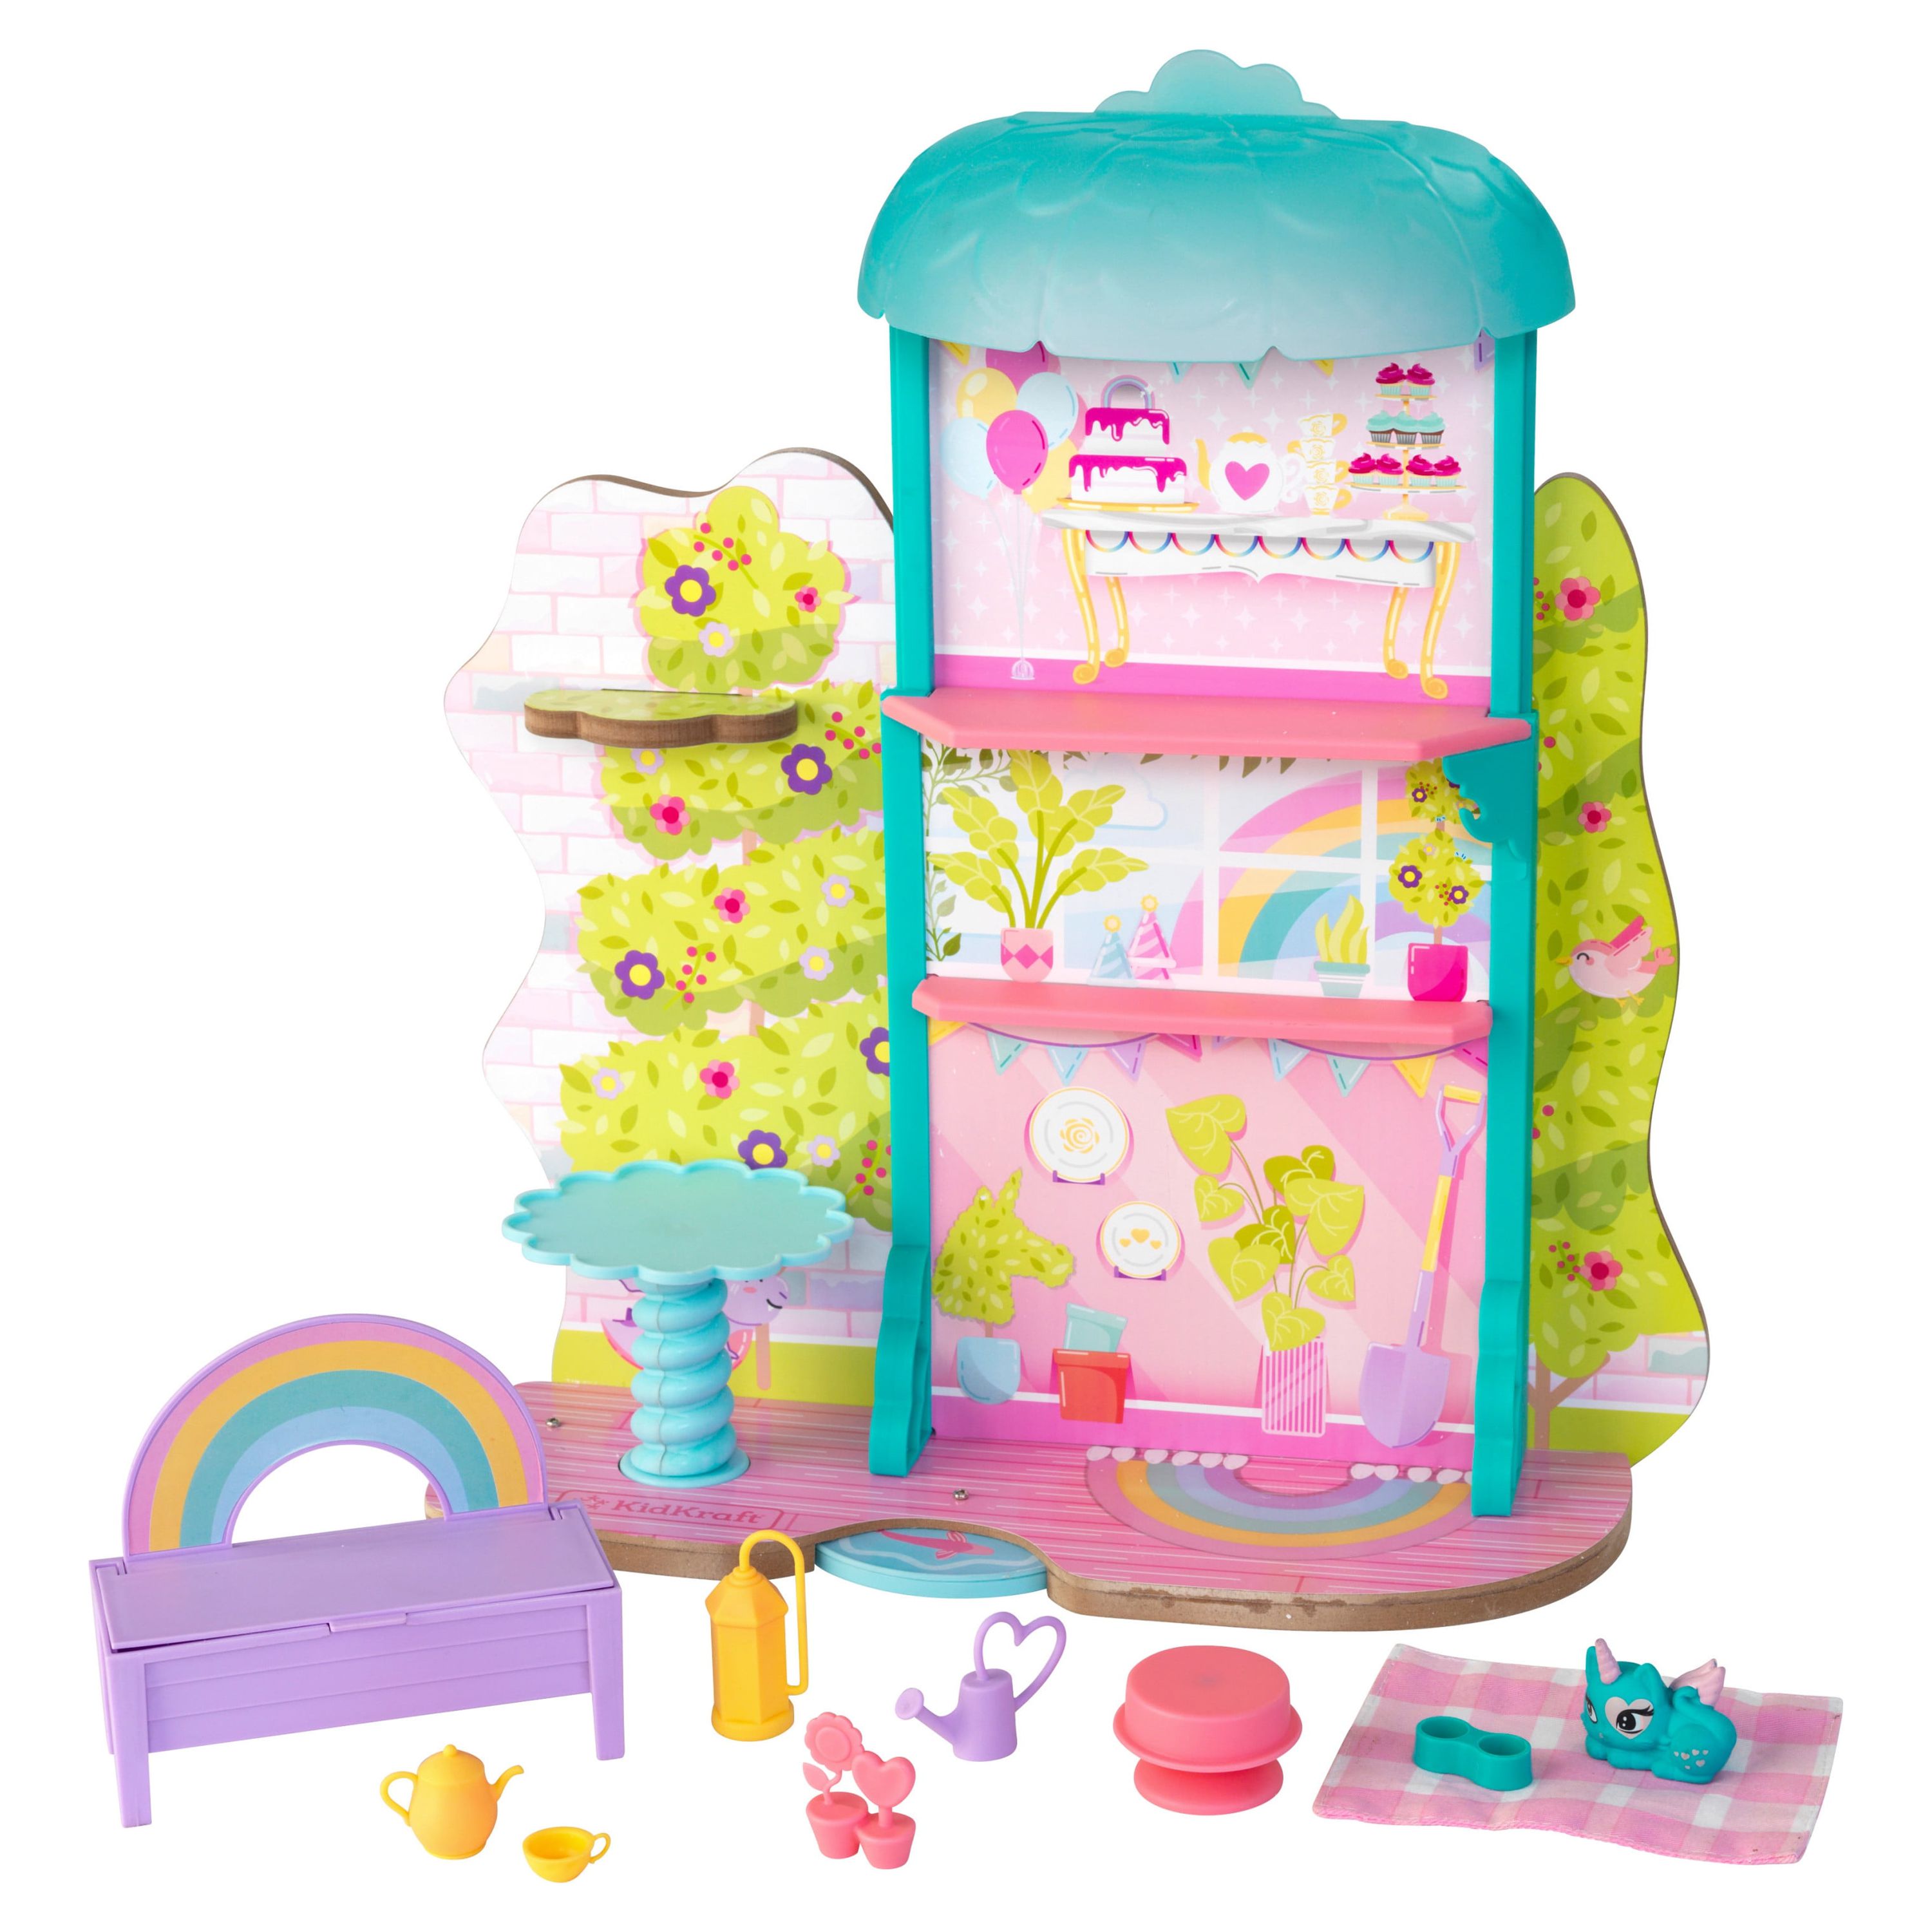 KidKraft Rainbow Dreamers Wooden Treetop Tea Time Gazebo Play Set with 10 Accessories - image 1 of 7